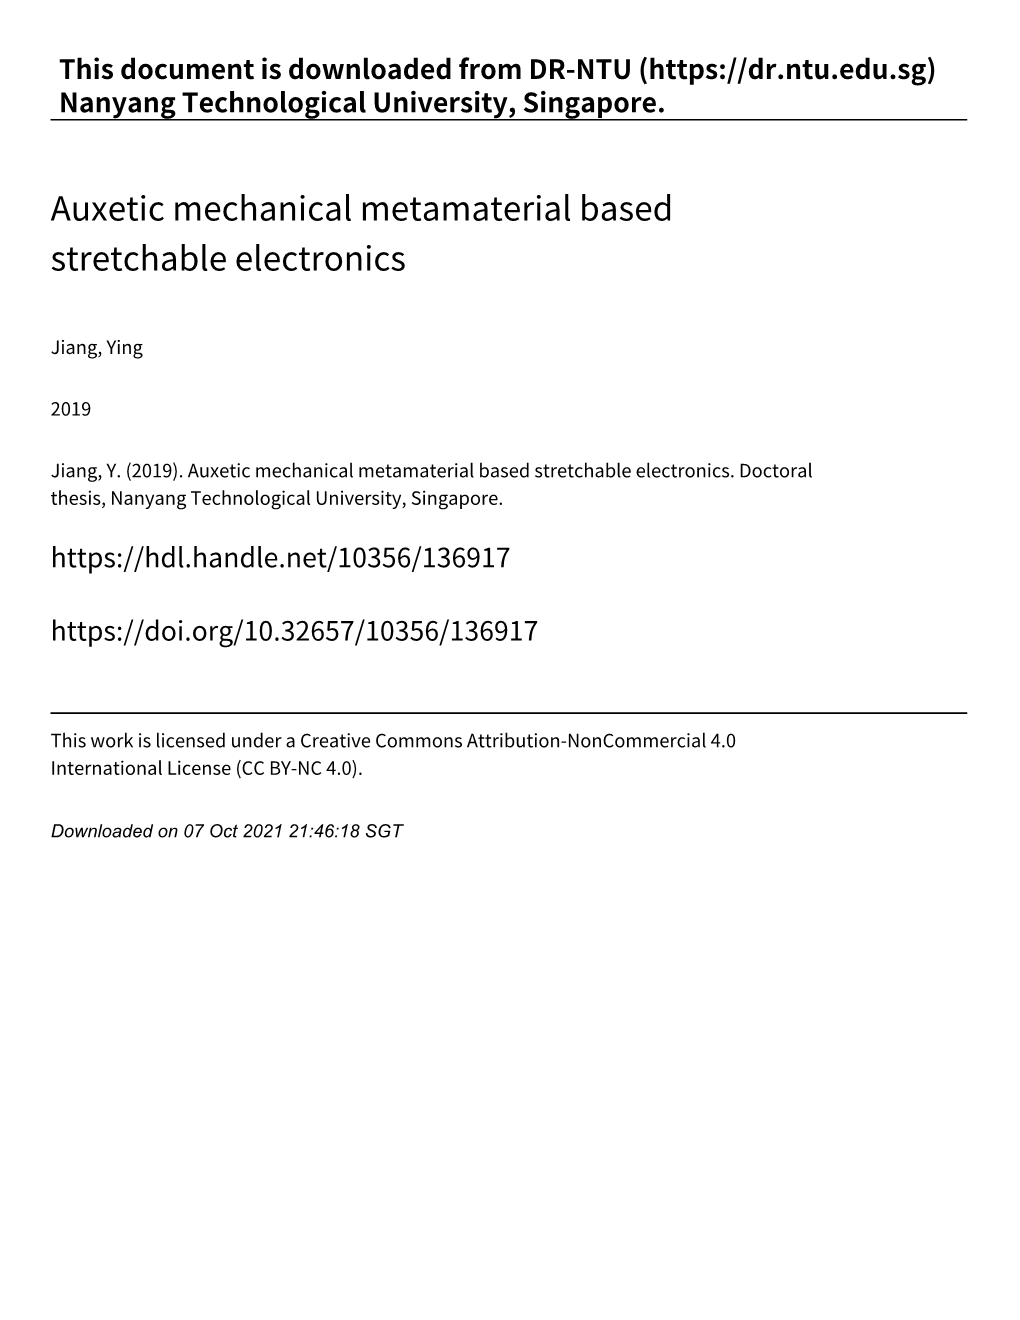 Auxetic Mechanical Metamaterial Based Stretchable Electronics